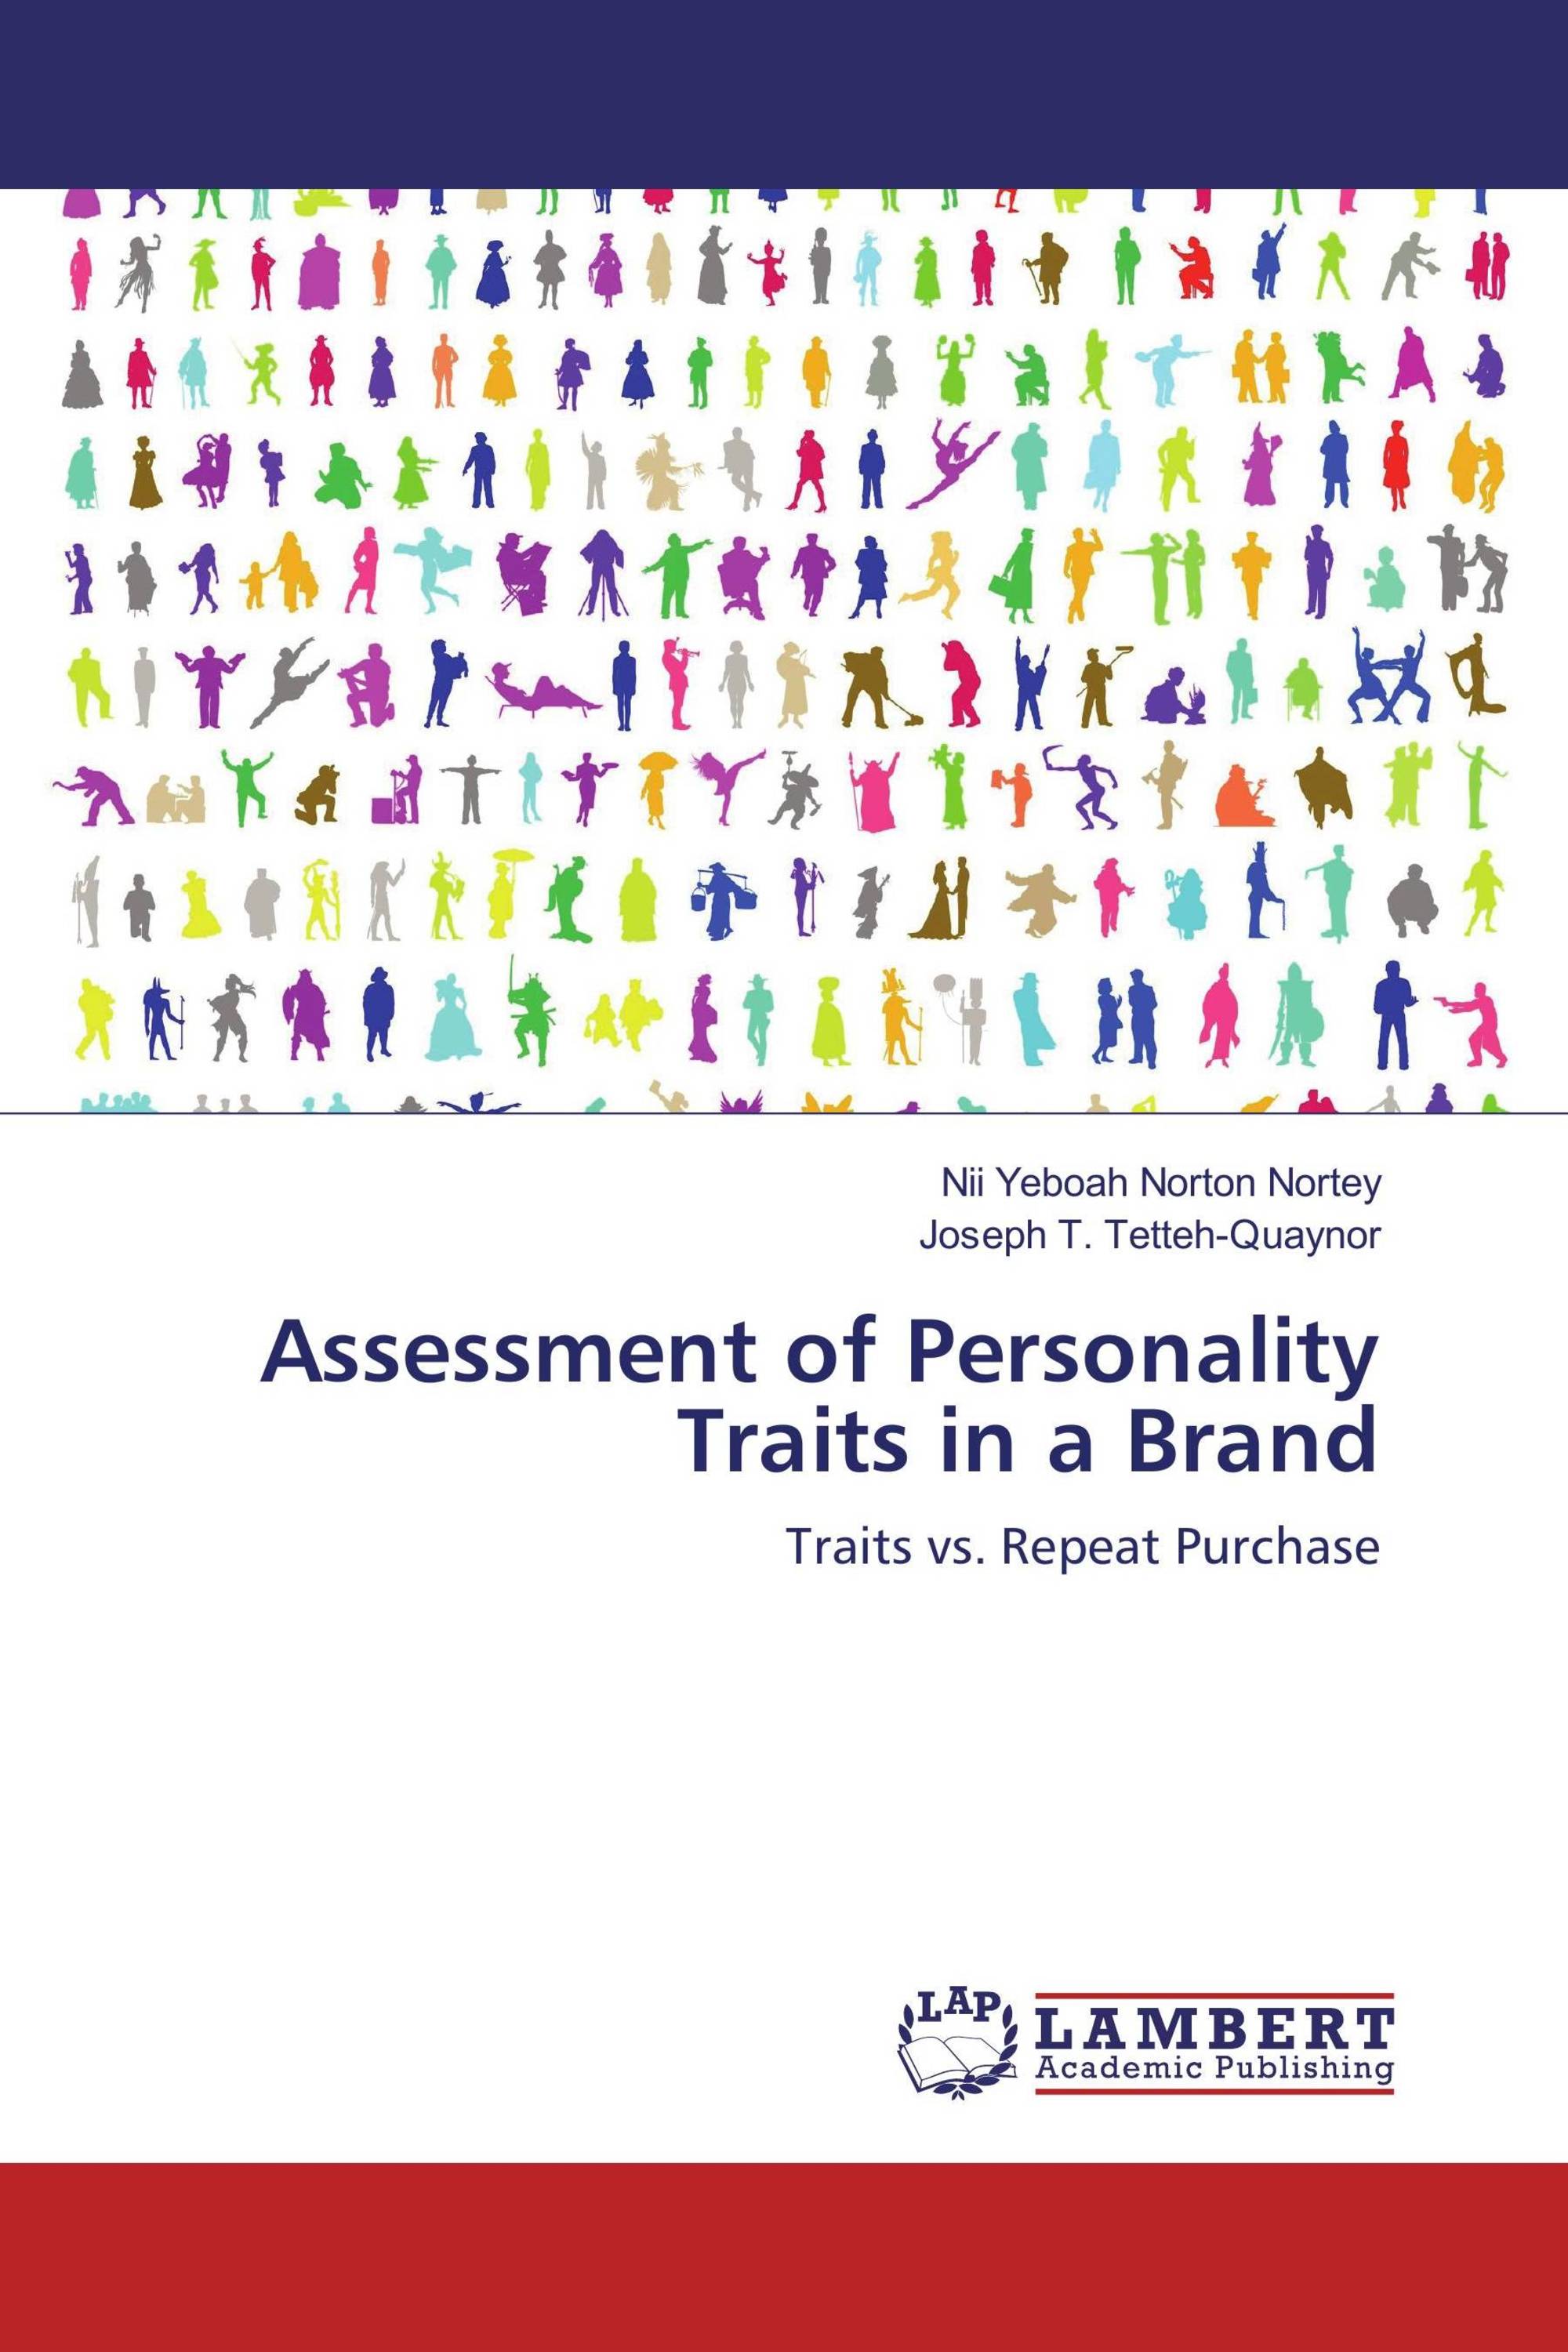 Thesis on personality traits